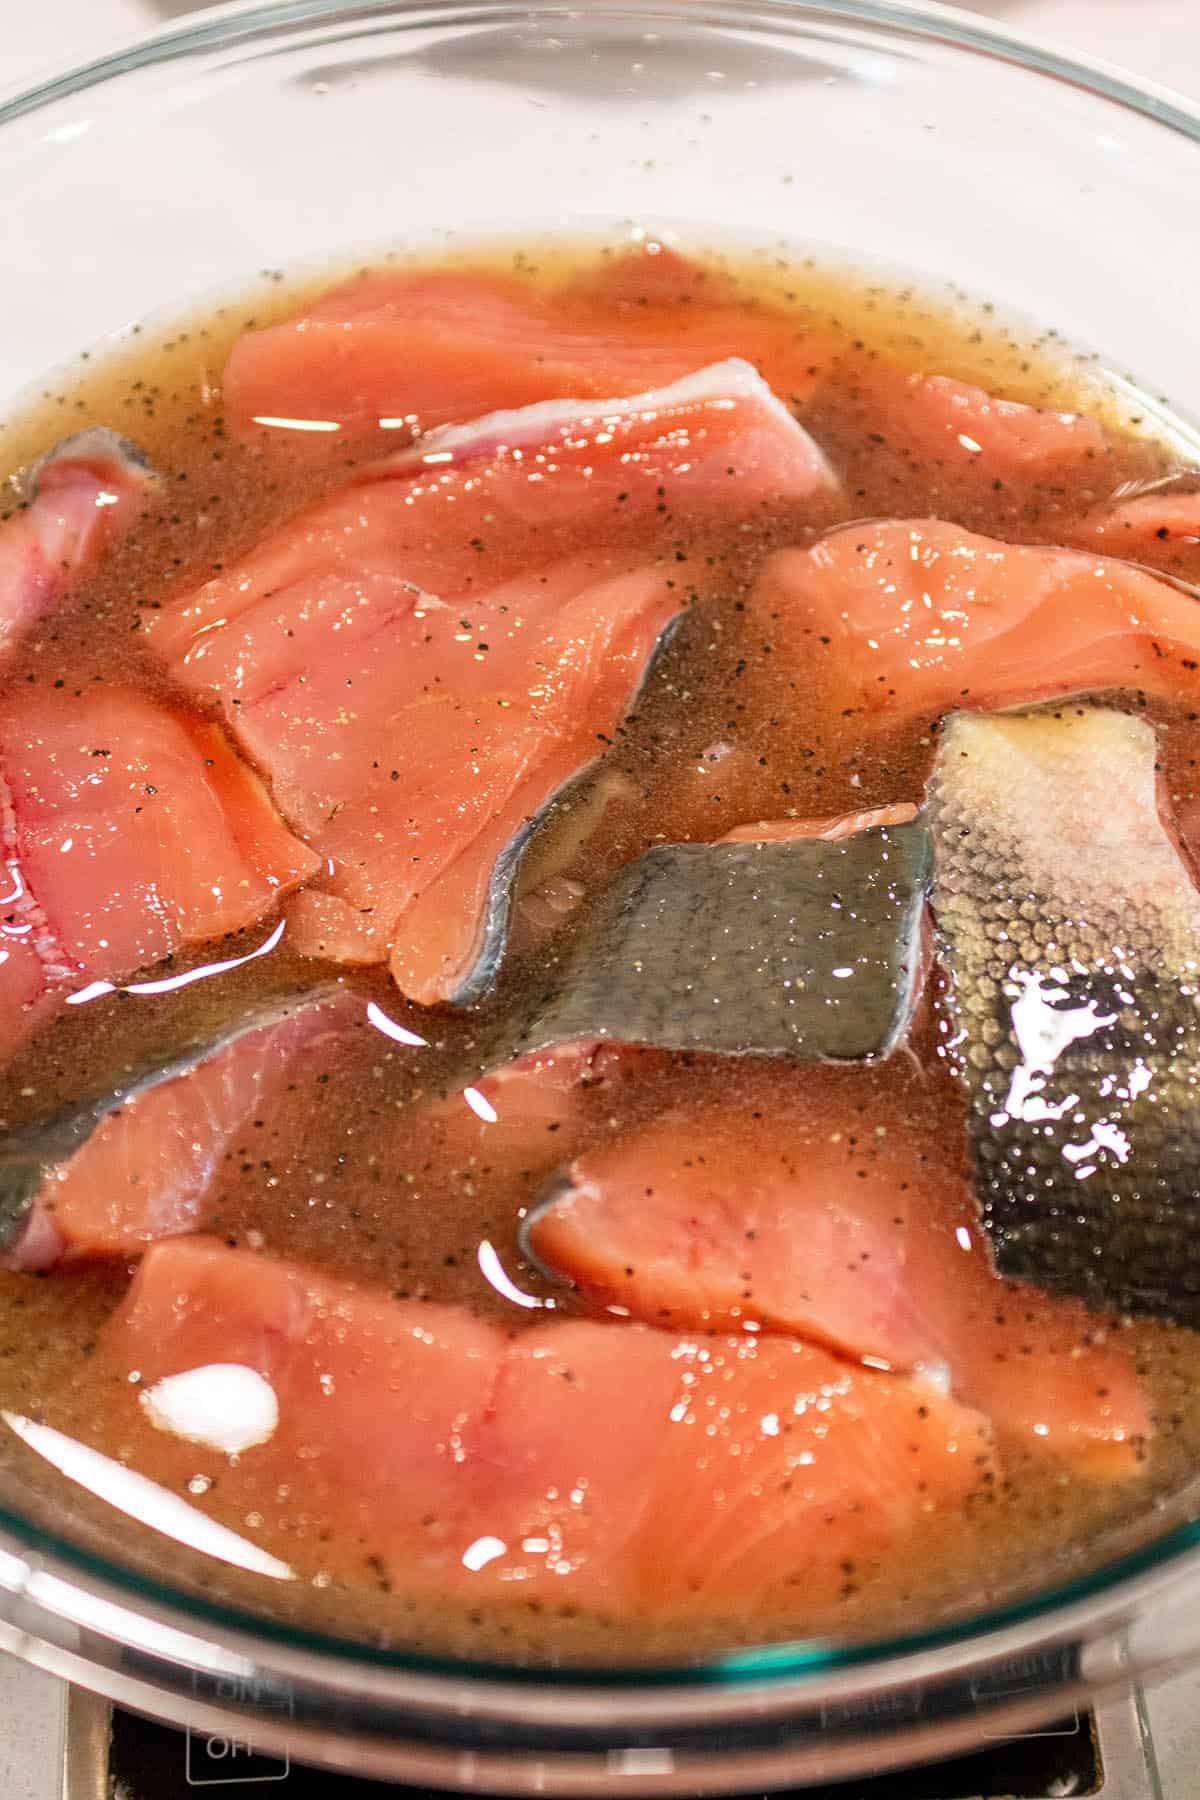 A glass bowl with salmon filets sitting in a brine solution.